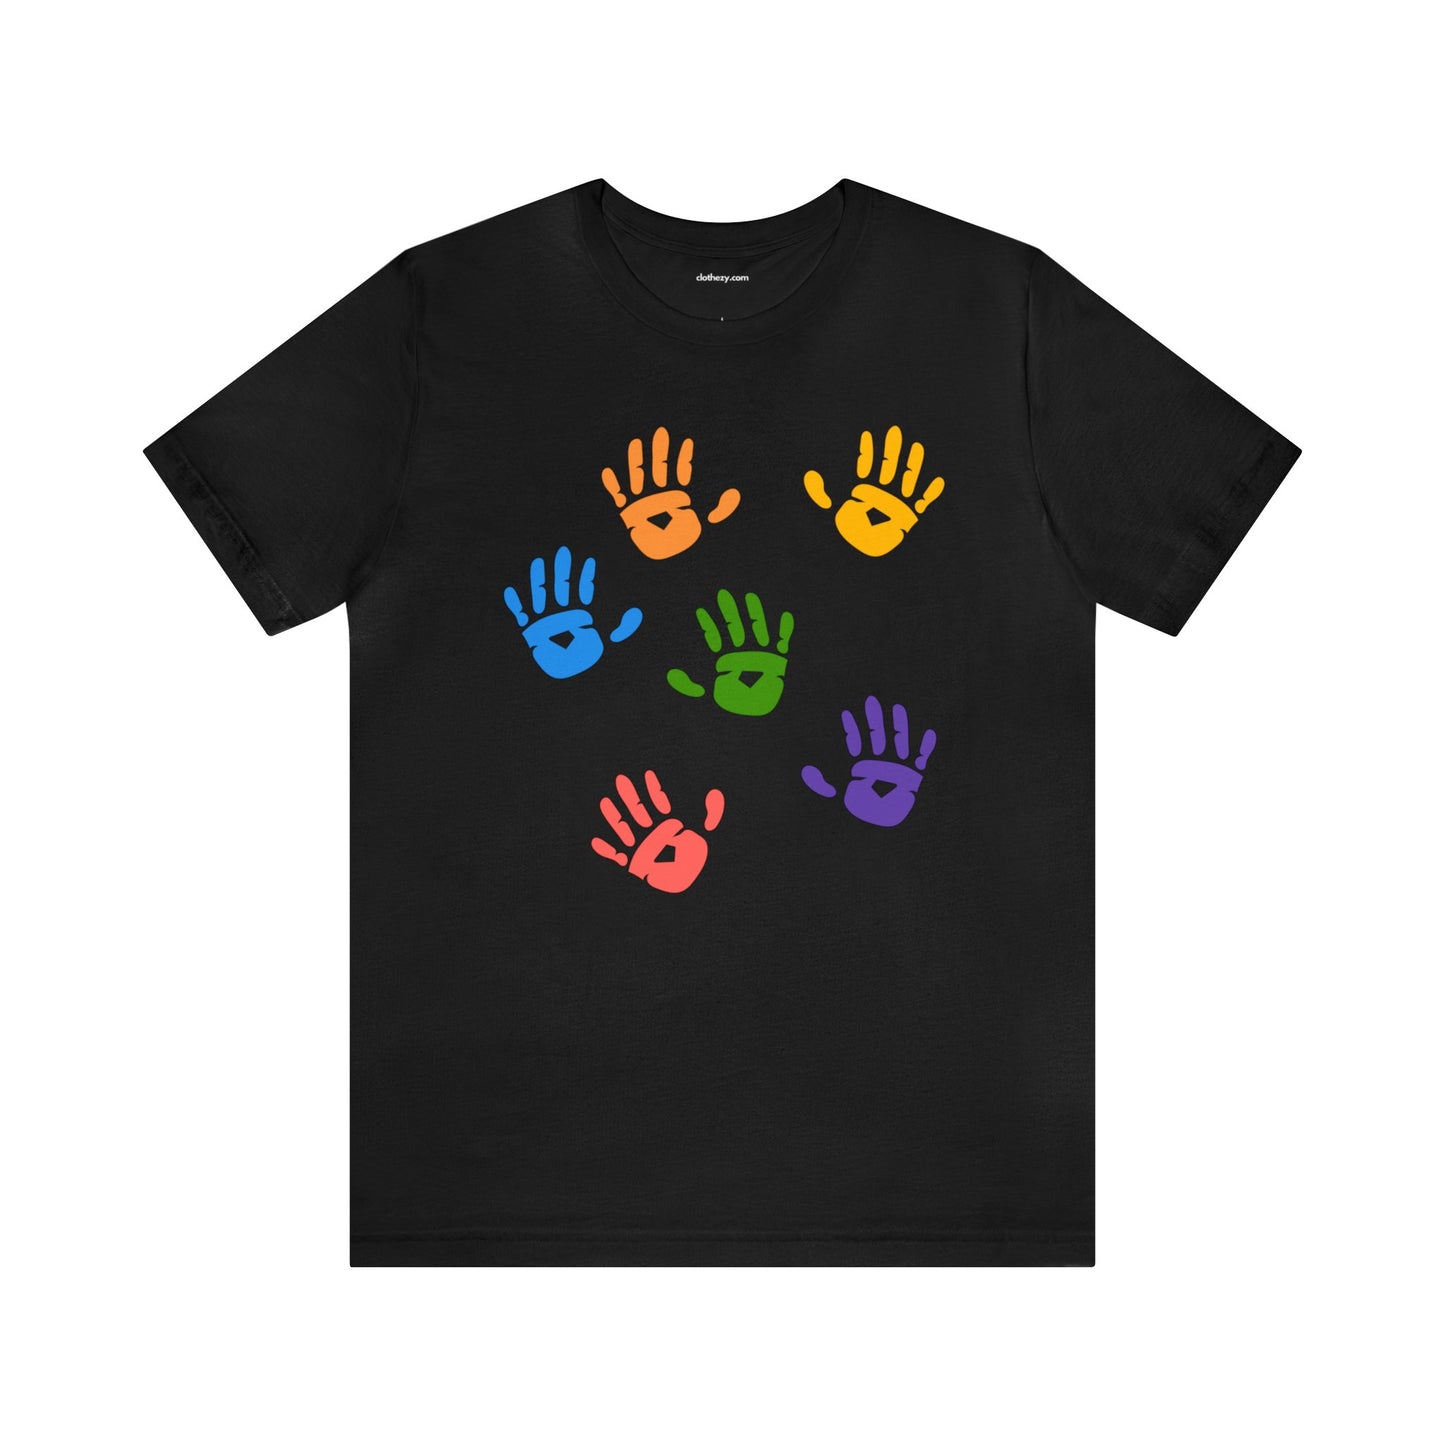 Rainbow Hand Prints T-Shirt - Unisex Adult Tee by clothezy.com in Black - Buy Now